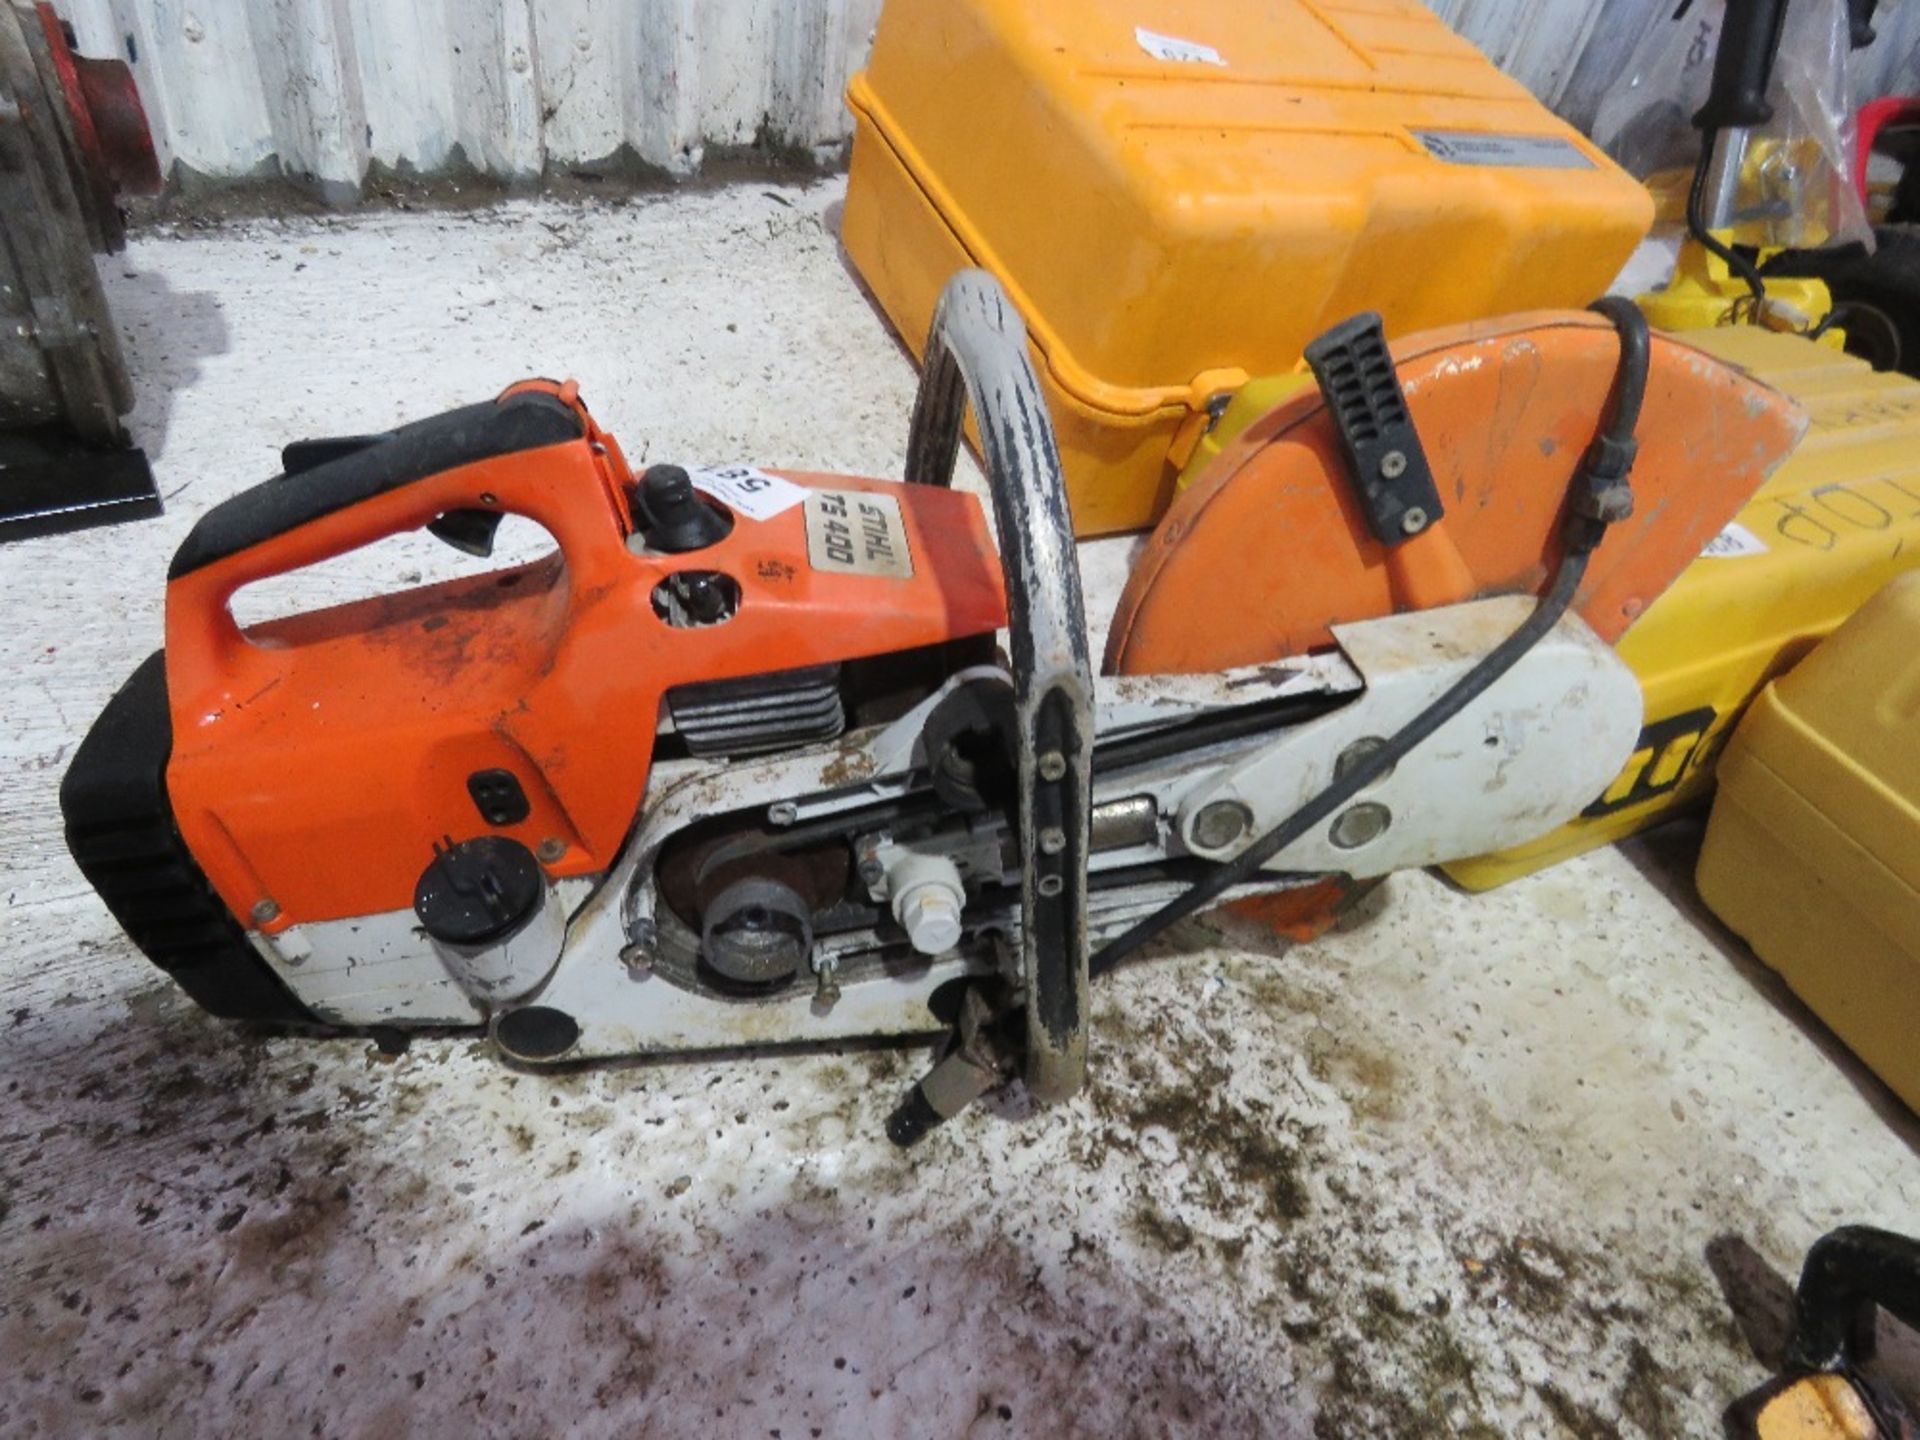 STIHL TS400 PETROL SAW, INCOMPLETE.....THIS LOT IS SOLD UNDER THE AUCTIONEERS MARGIN SCHEME, THEREFO